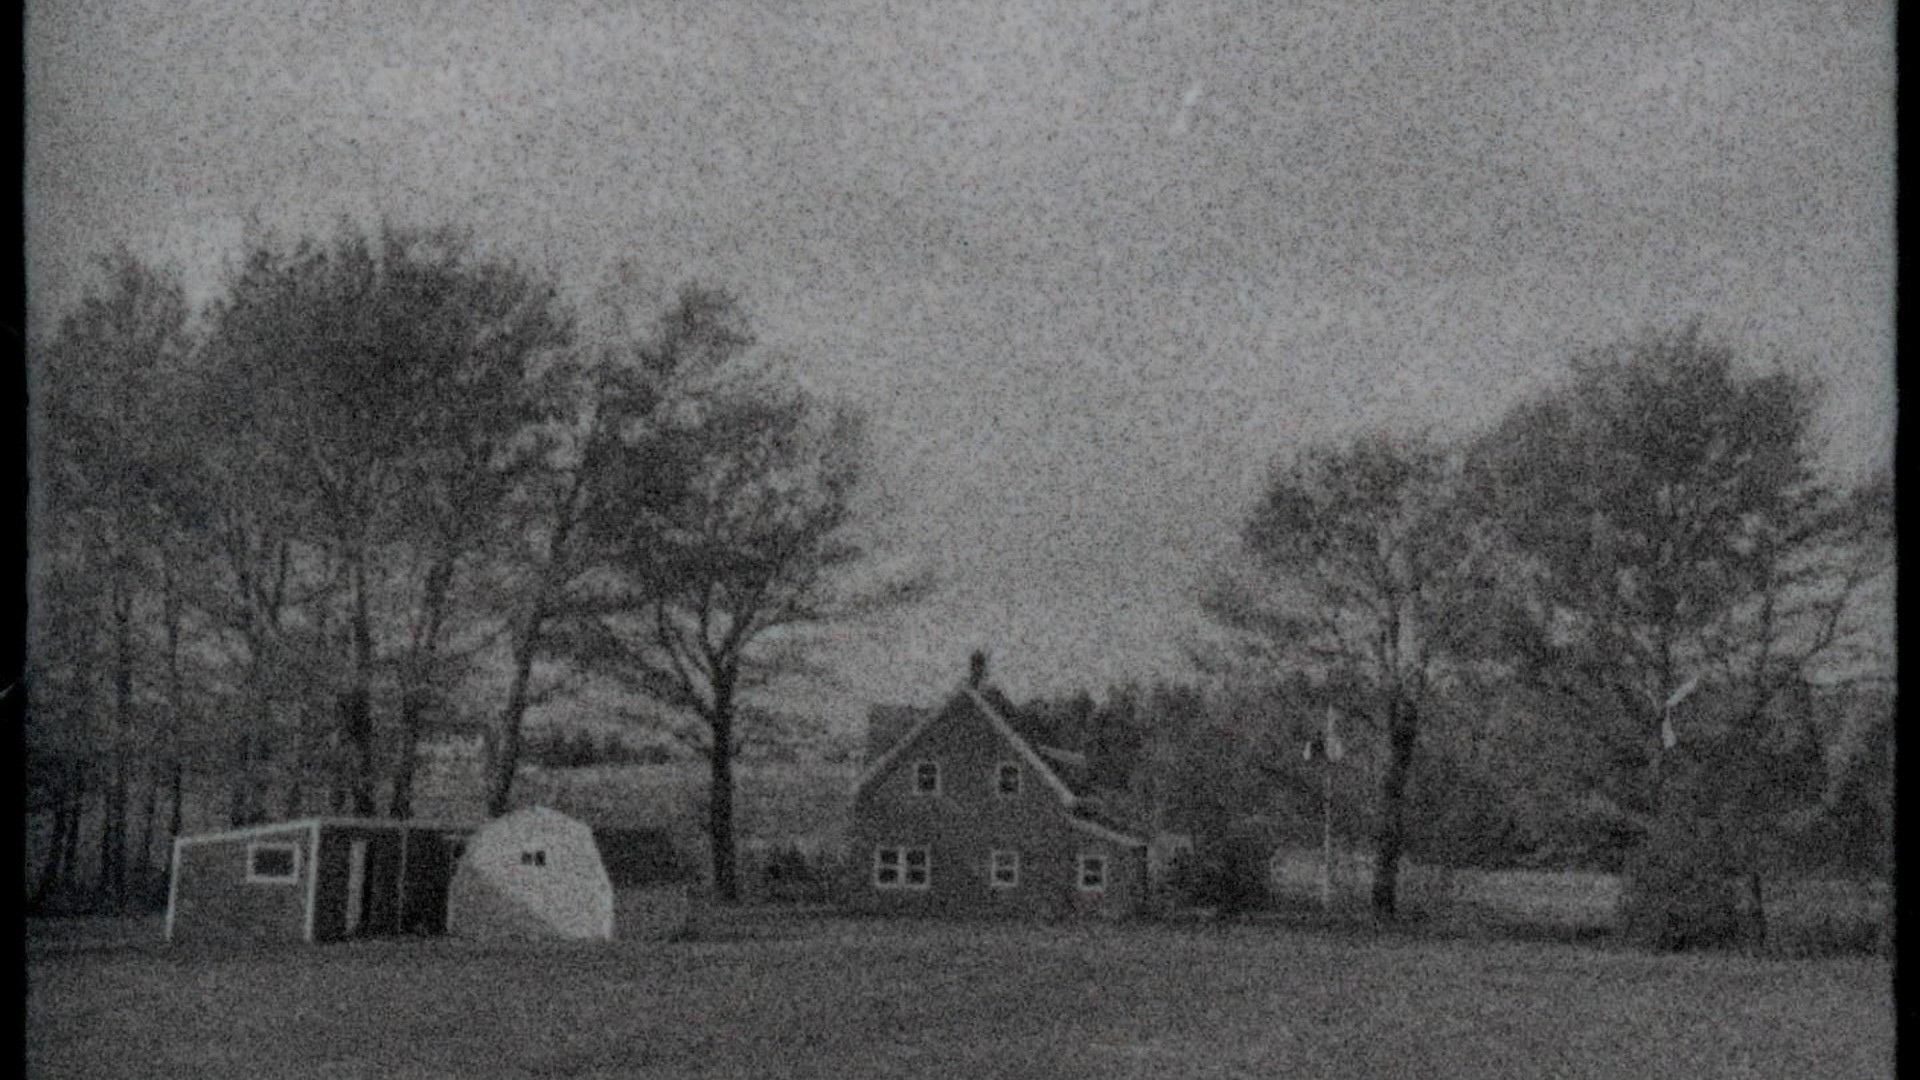 A black and white photo of a house and trees in the distance